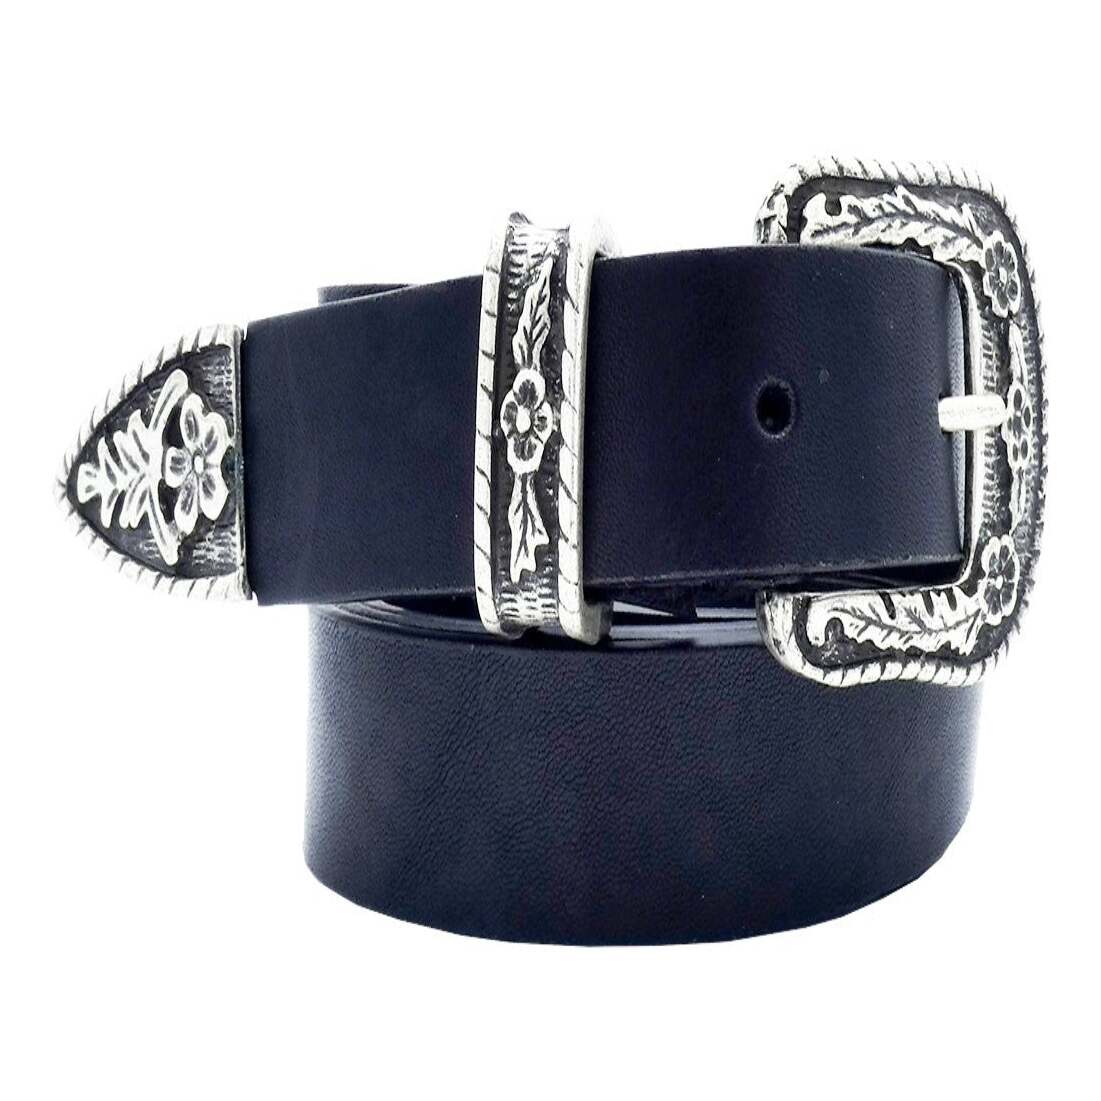 2.5cm Gauguin leather belt with antique silver zamak buckle and loop